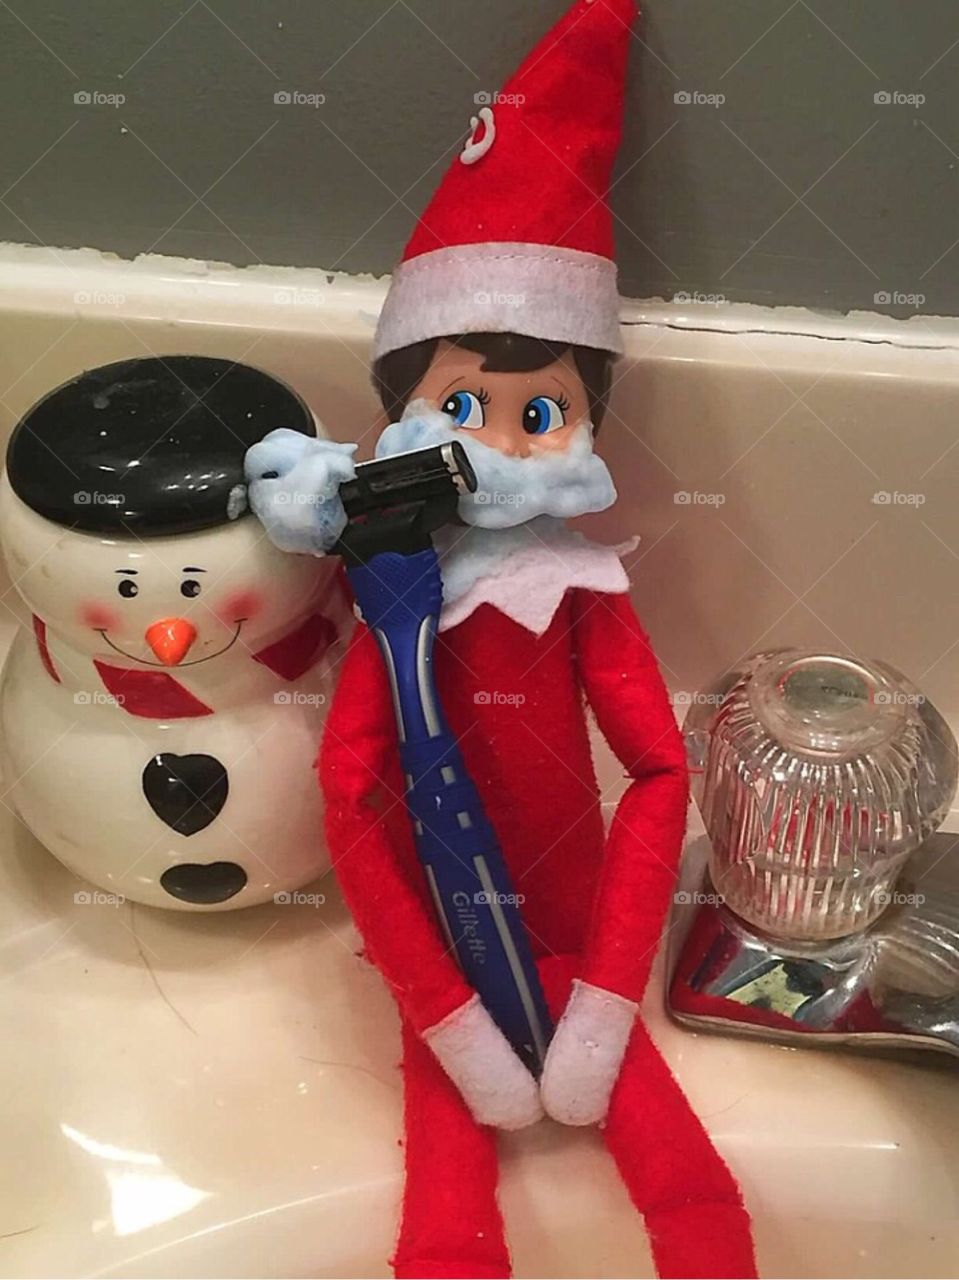 Our elf shaving his face 